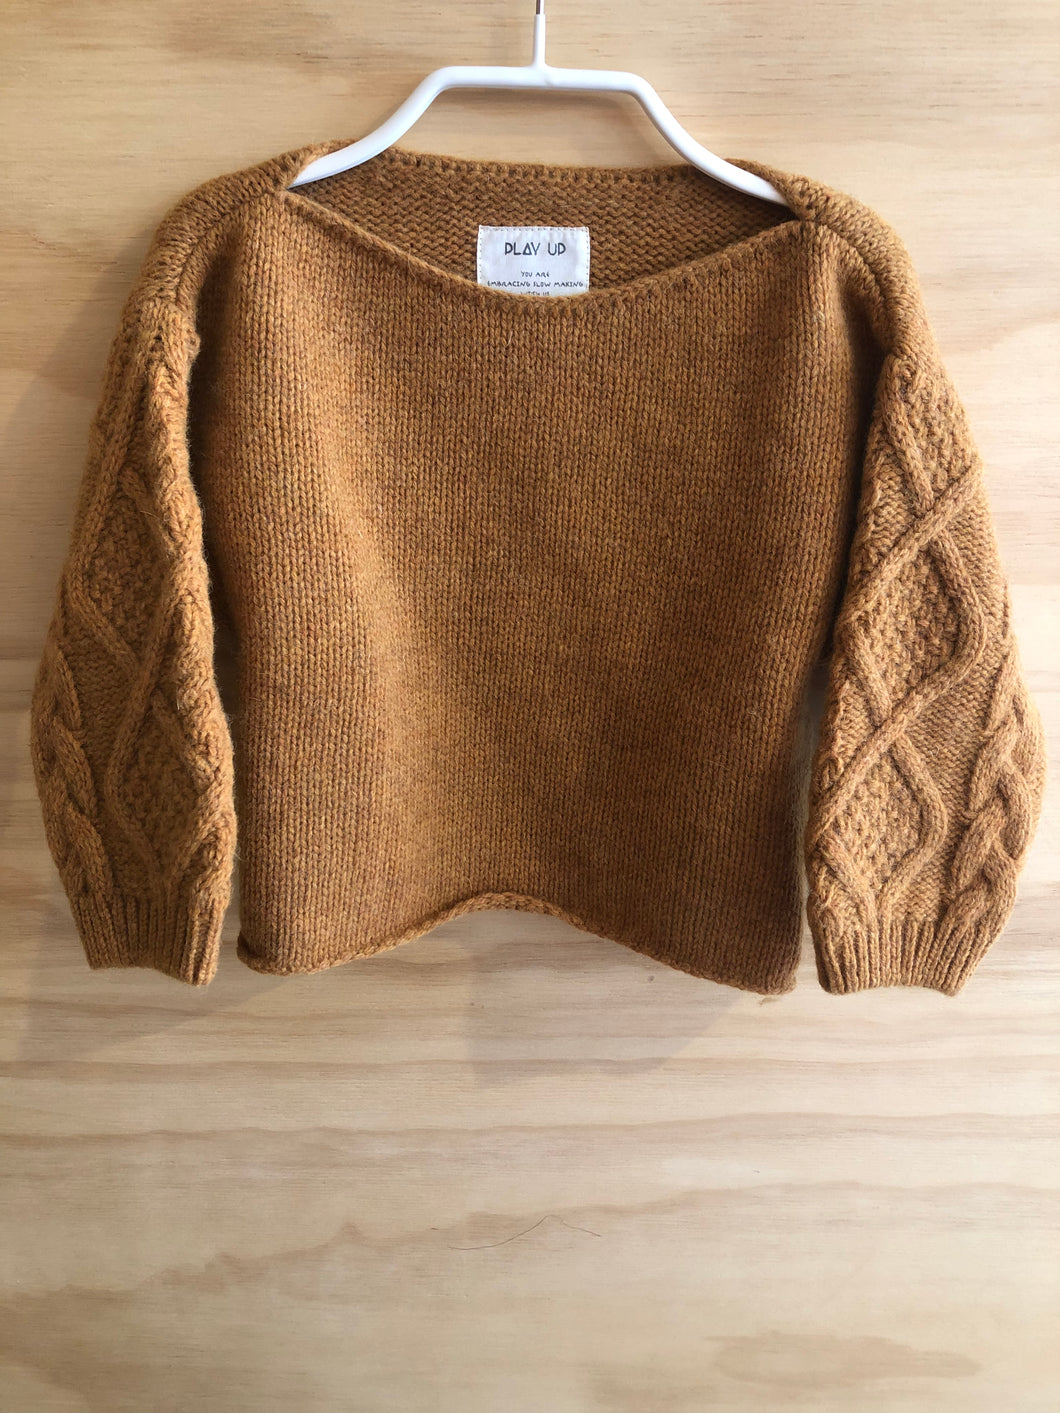 Play Up Knitted Sweater Vitamin SALE